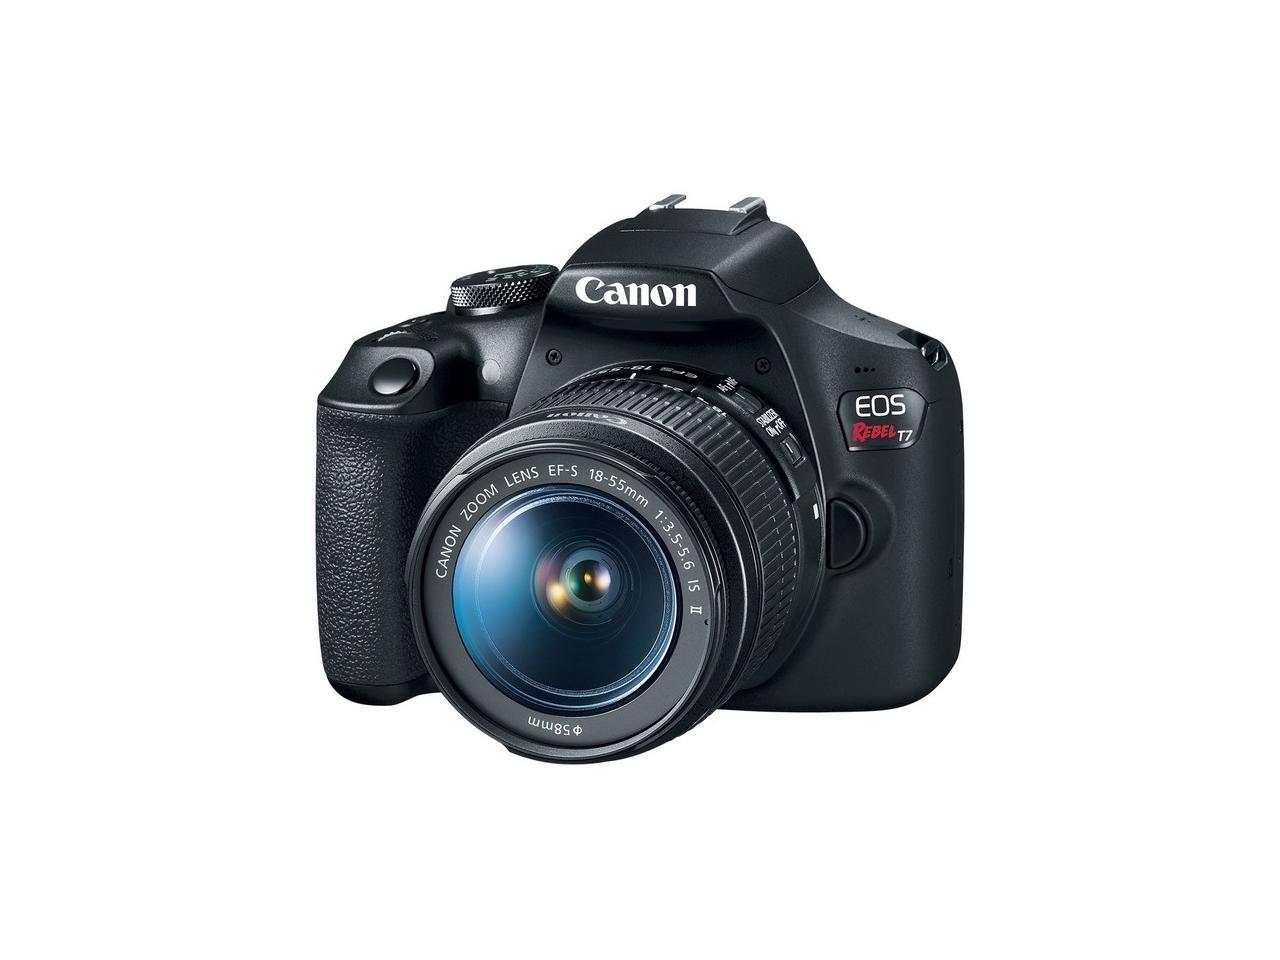 Canon EOS Rebel T7 EF18-55mm + EF 75-300mm Double Zoom KIT T7 EF18-55mm + EF 75-300mm Double Zoom KIT - image 15 of 20